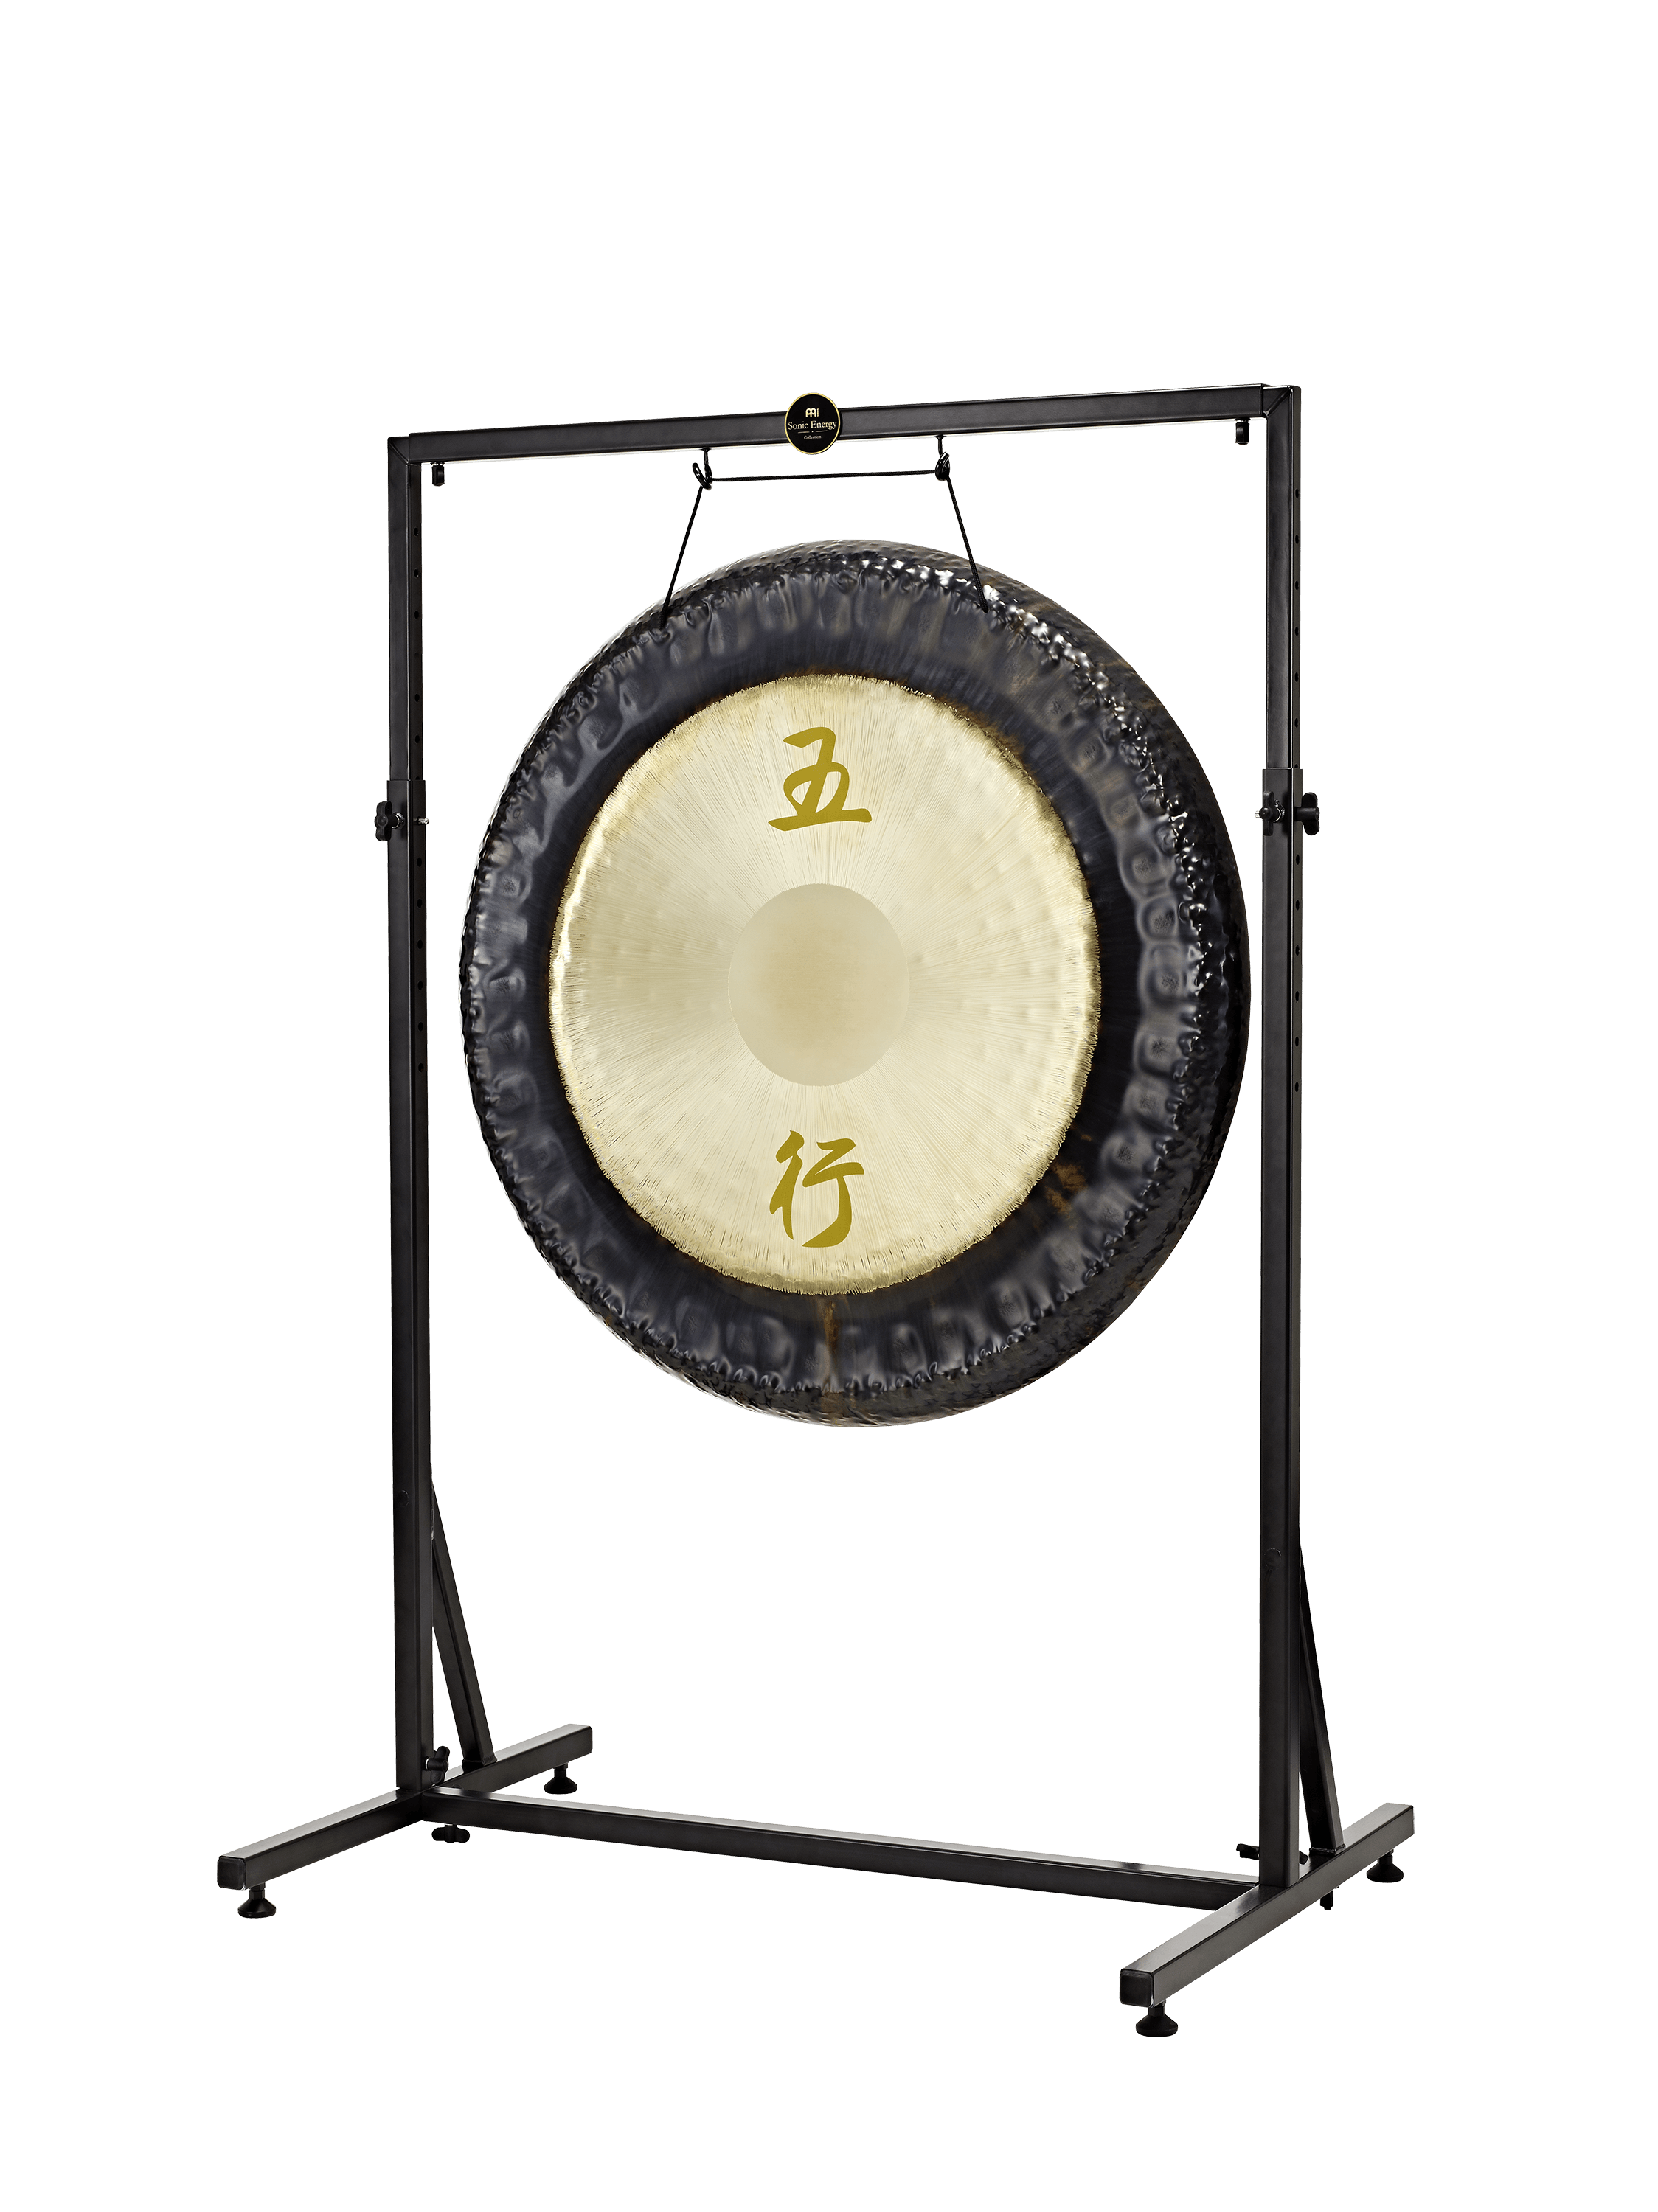 Framed Gong Stand Up To 40" Gong Size - Framed Gong / Tam Tam Stand